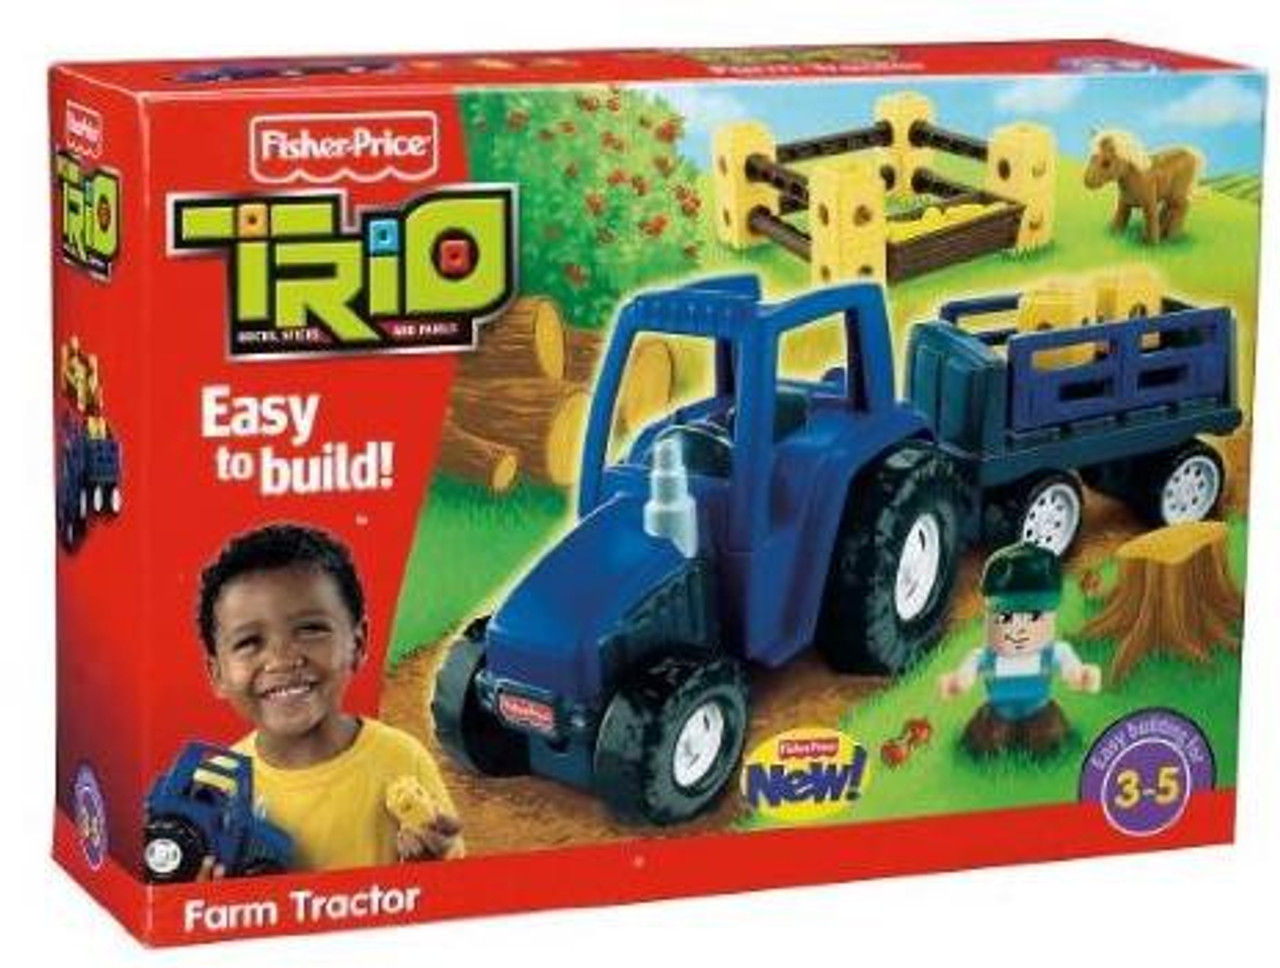 fisher price tractor